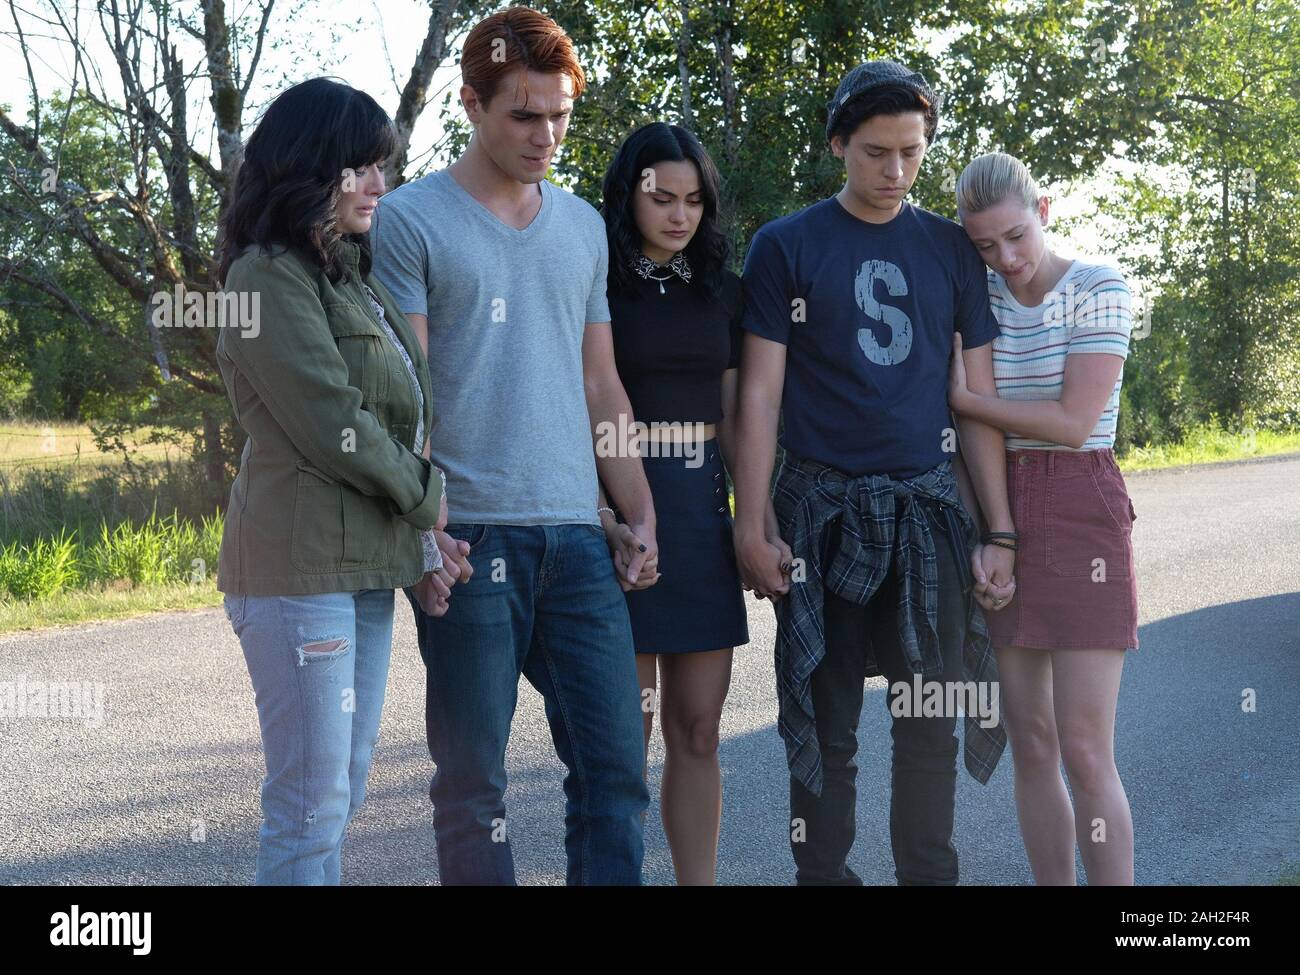 SHANNEN DOHERTY, COLE SPROUSE, KJ APA, LILI REINHART and CAMILA MENDES in RIVERDALE (2017), directed by ROBERTO AGUIRRE-SACASA. Temporada 4 Episodio 1. Credit: CBS TELEVISION / Album Stock Photo